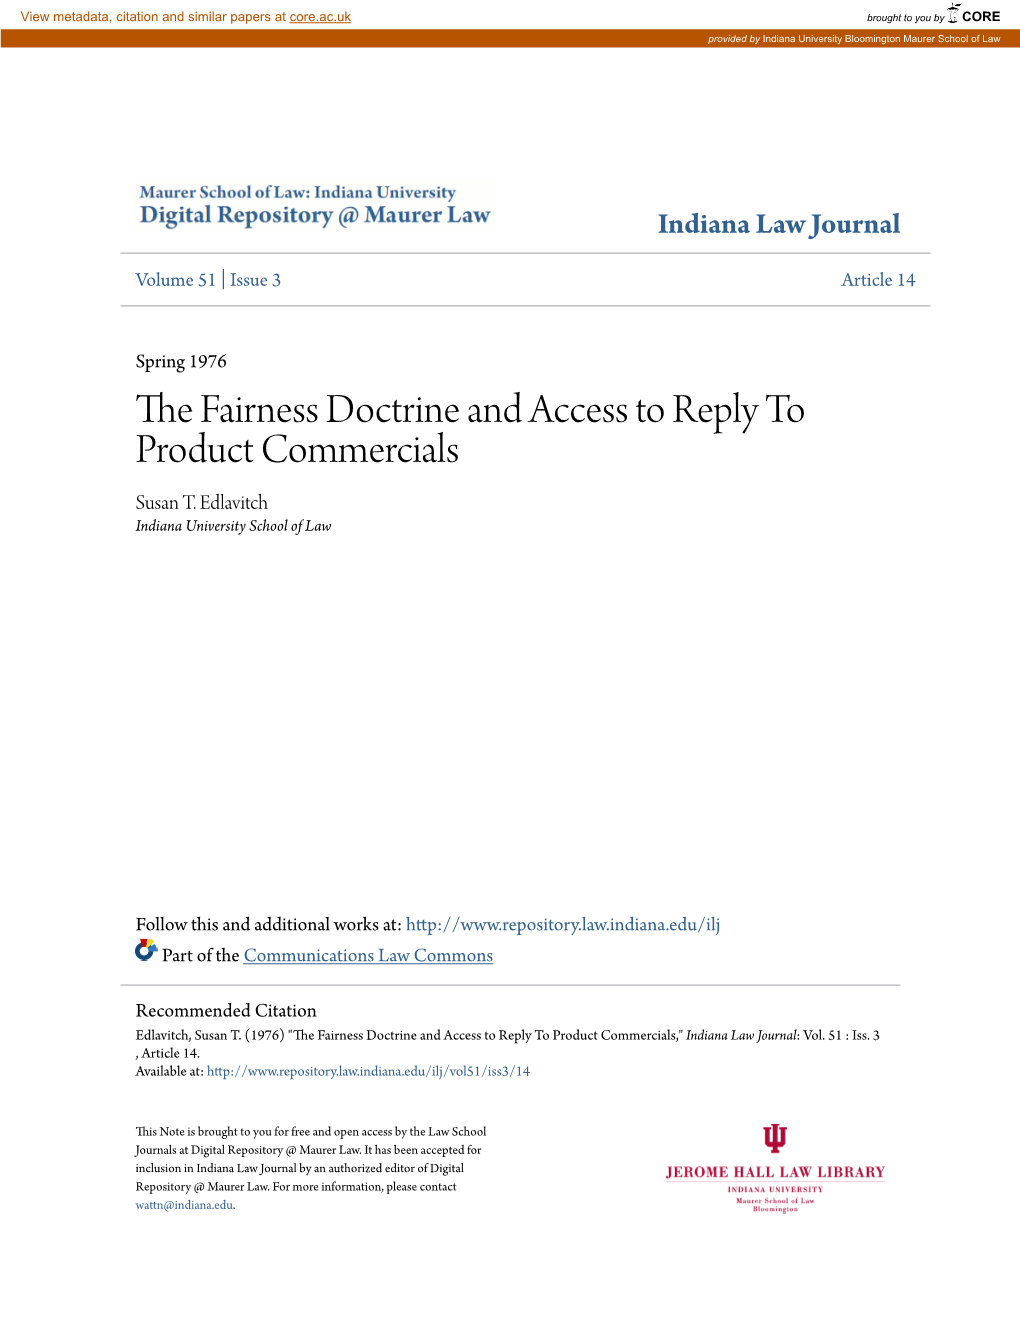 The Fairness Doctrine and Access to Reply to Product Commercials